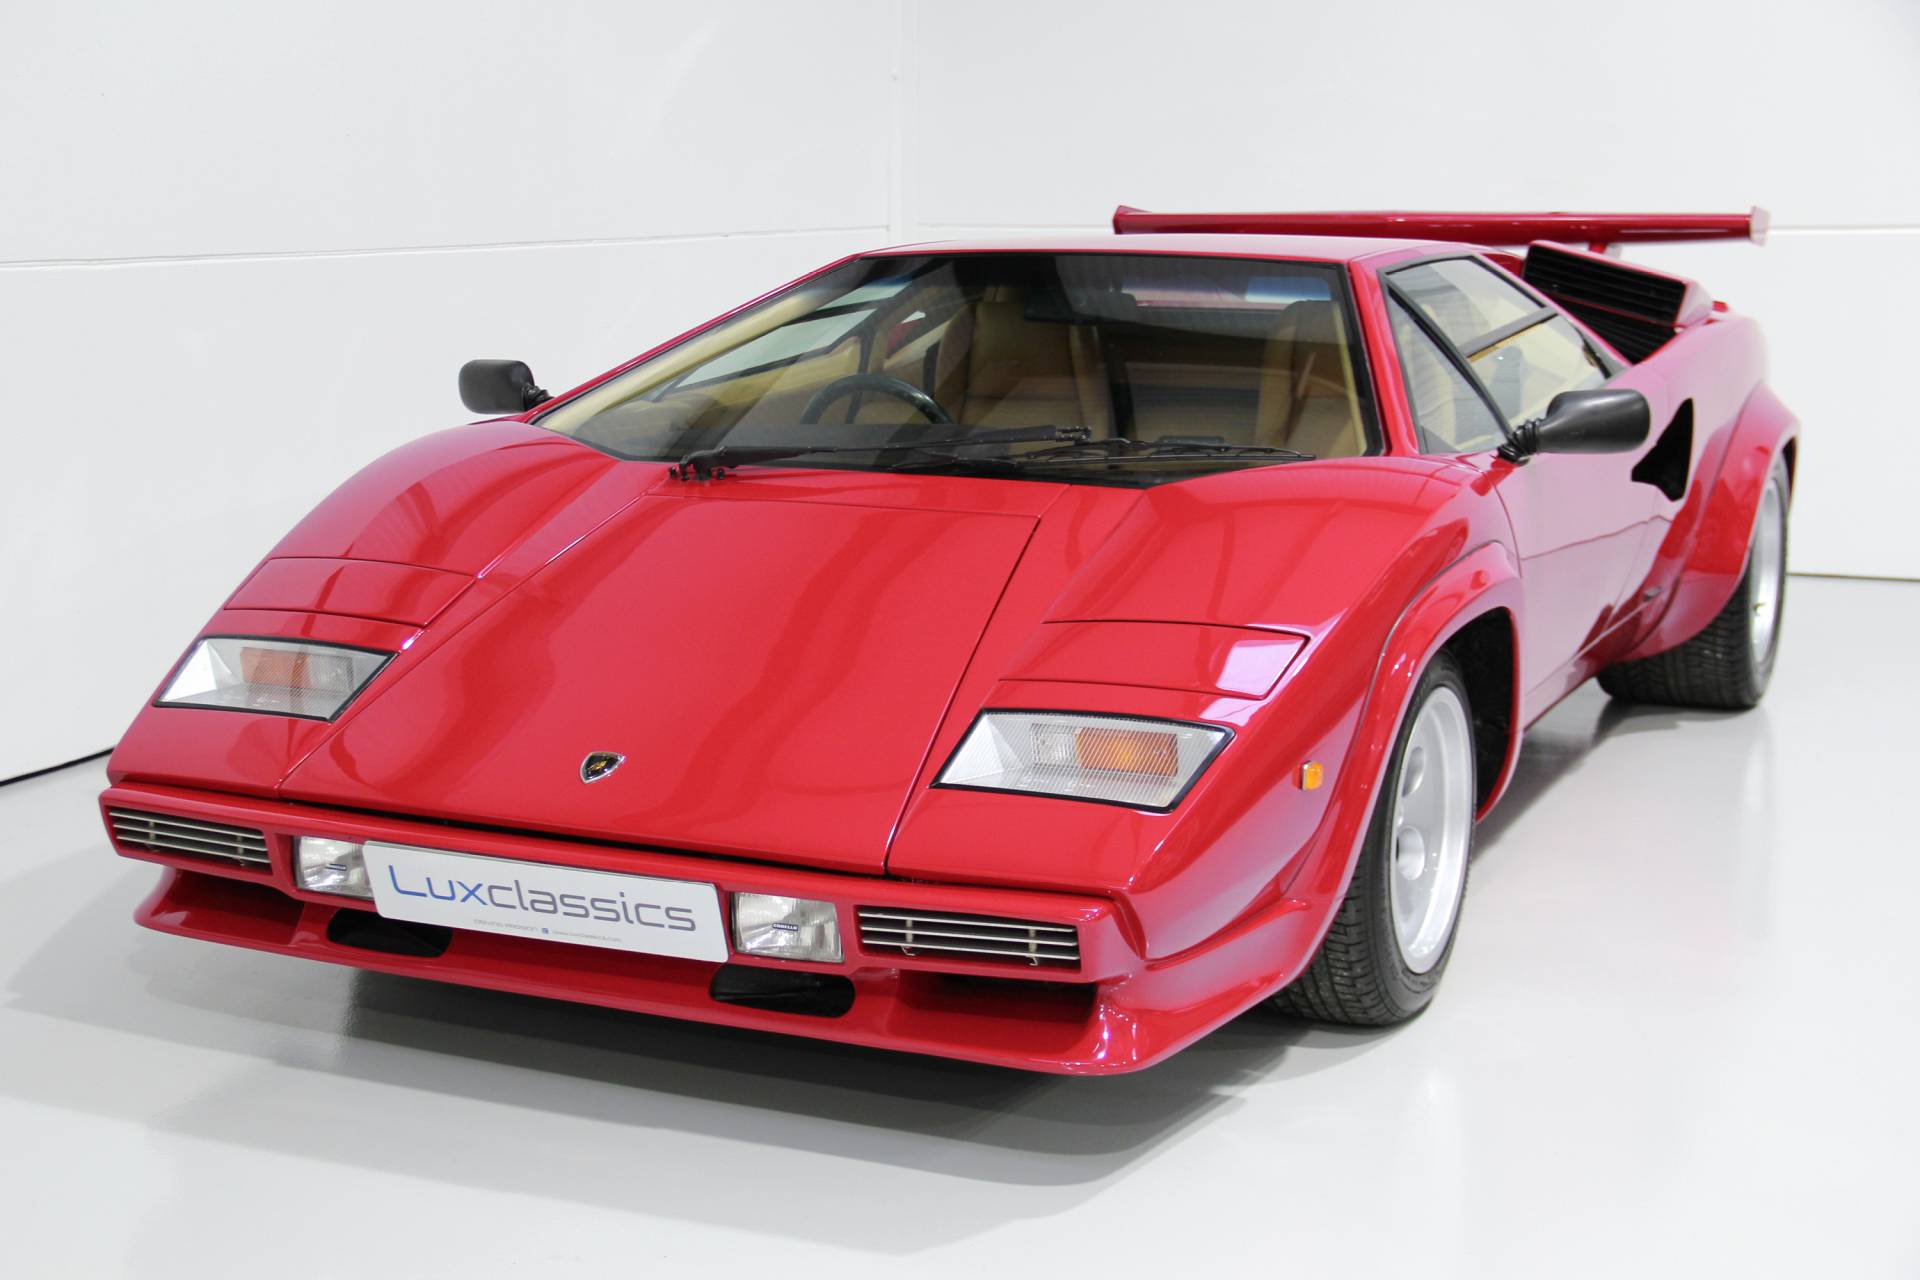 For Sale Lamborghini Countach Lp 500 S 1983 Offered For Gbp 299000